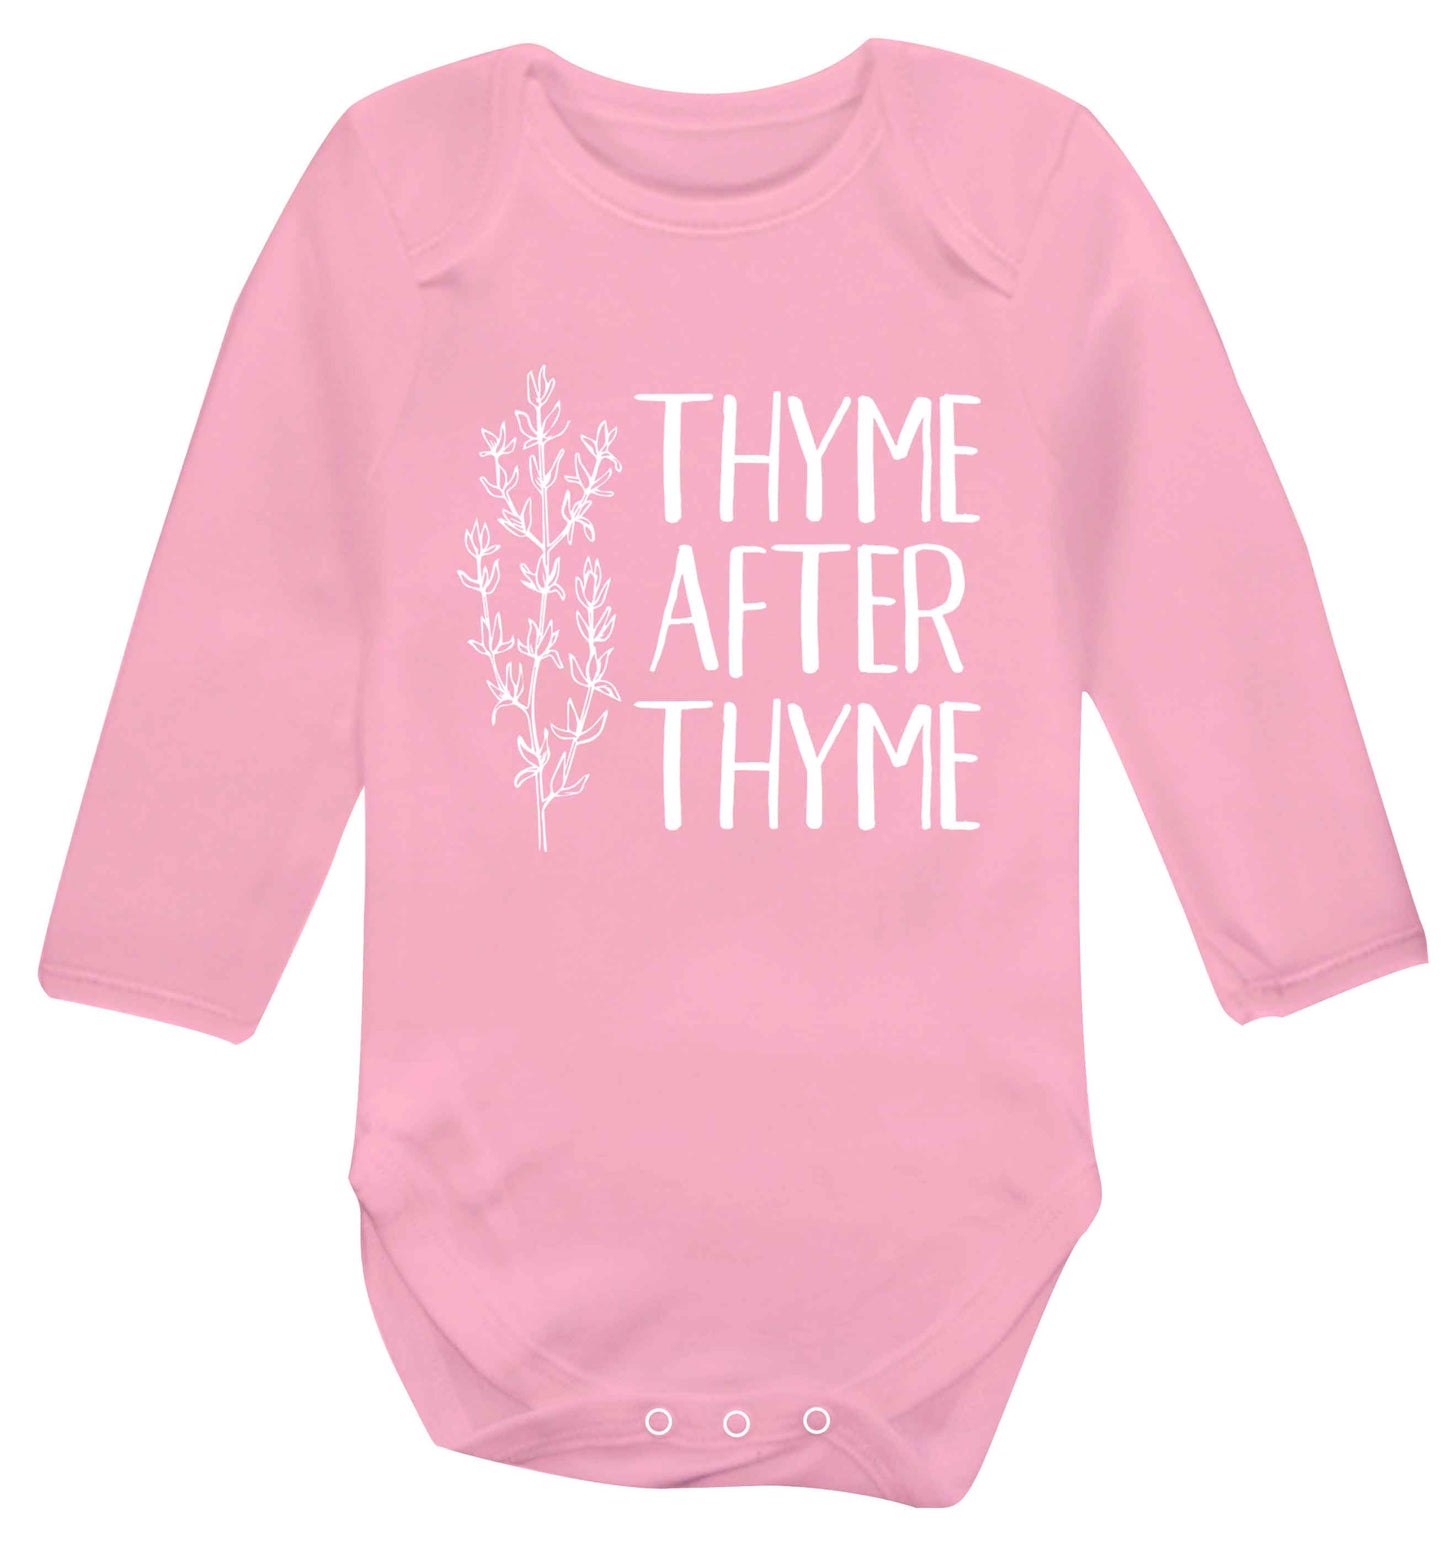 Thyme after thyme Baby Vest long sleeved pale pink 6-12 months